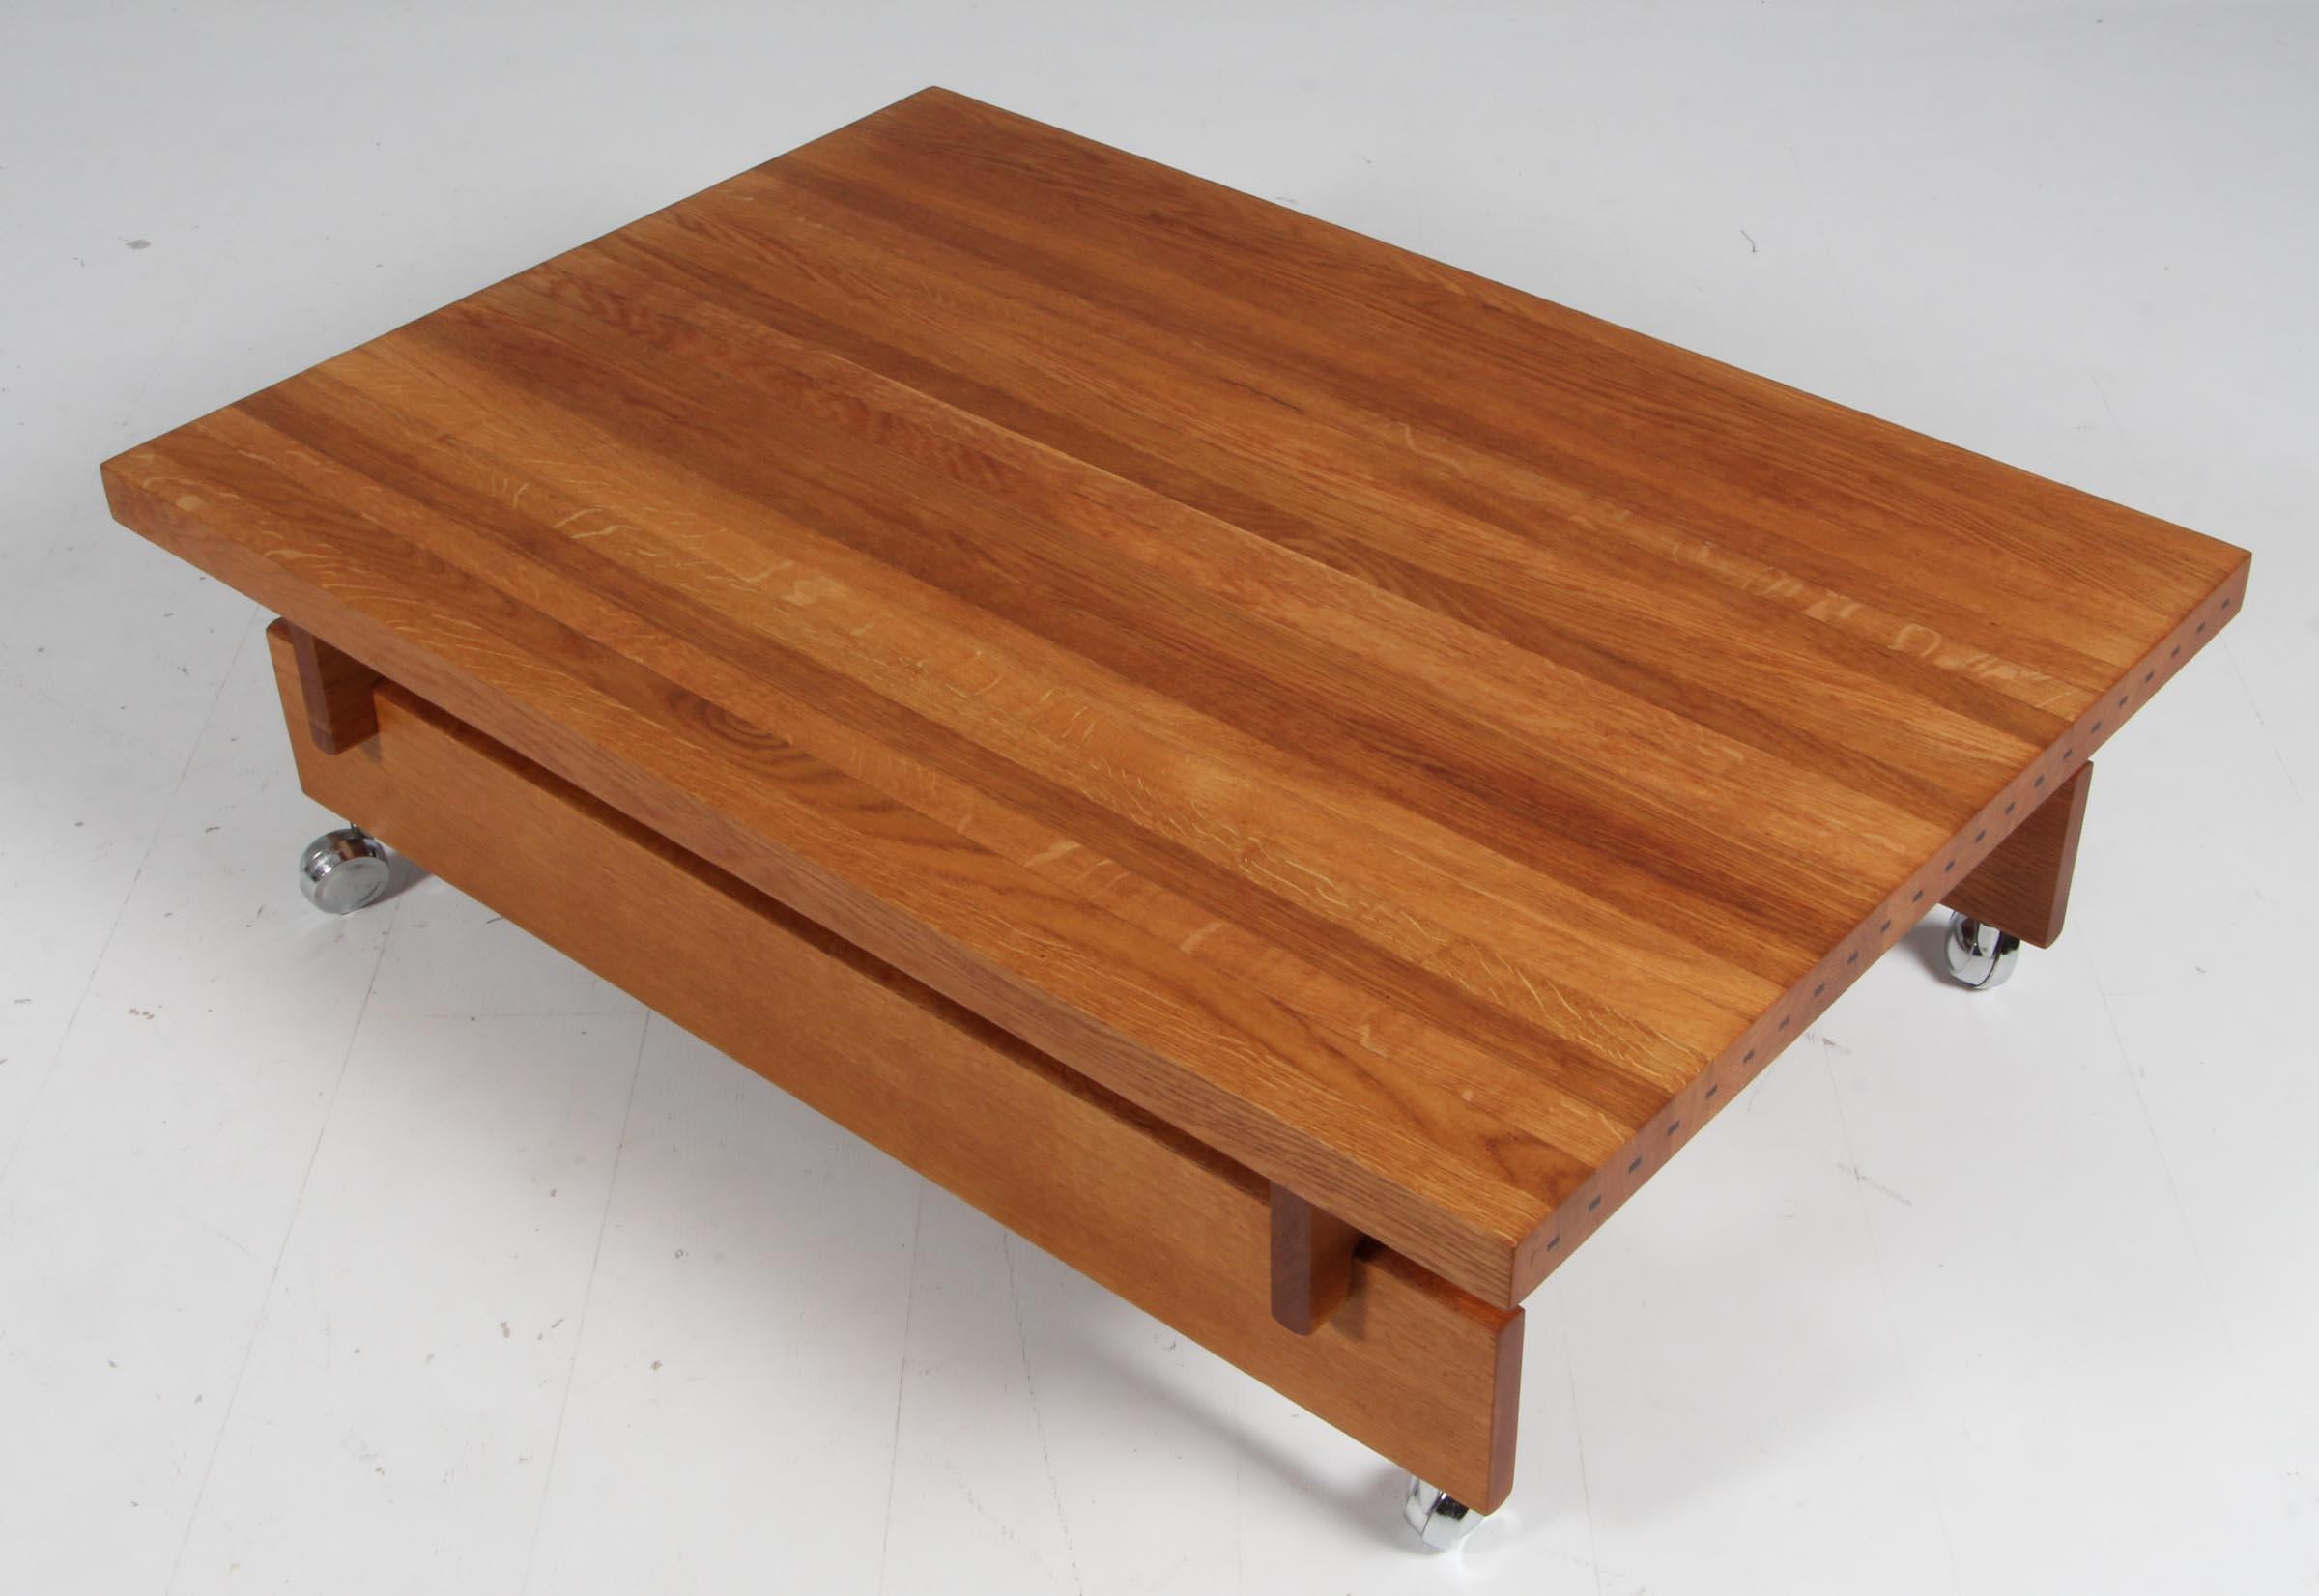 Jørgen Aakjær coffee table in solid oil treated oak, mounted on wheels.

Made by Møbelintarsia.

Made in Denmark in the 1960s.